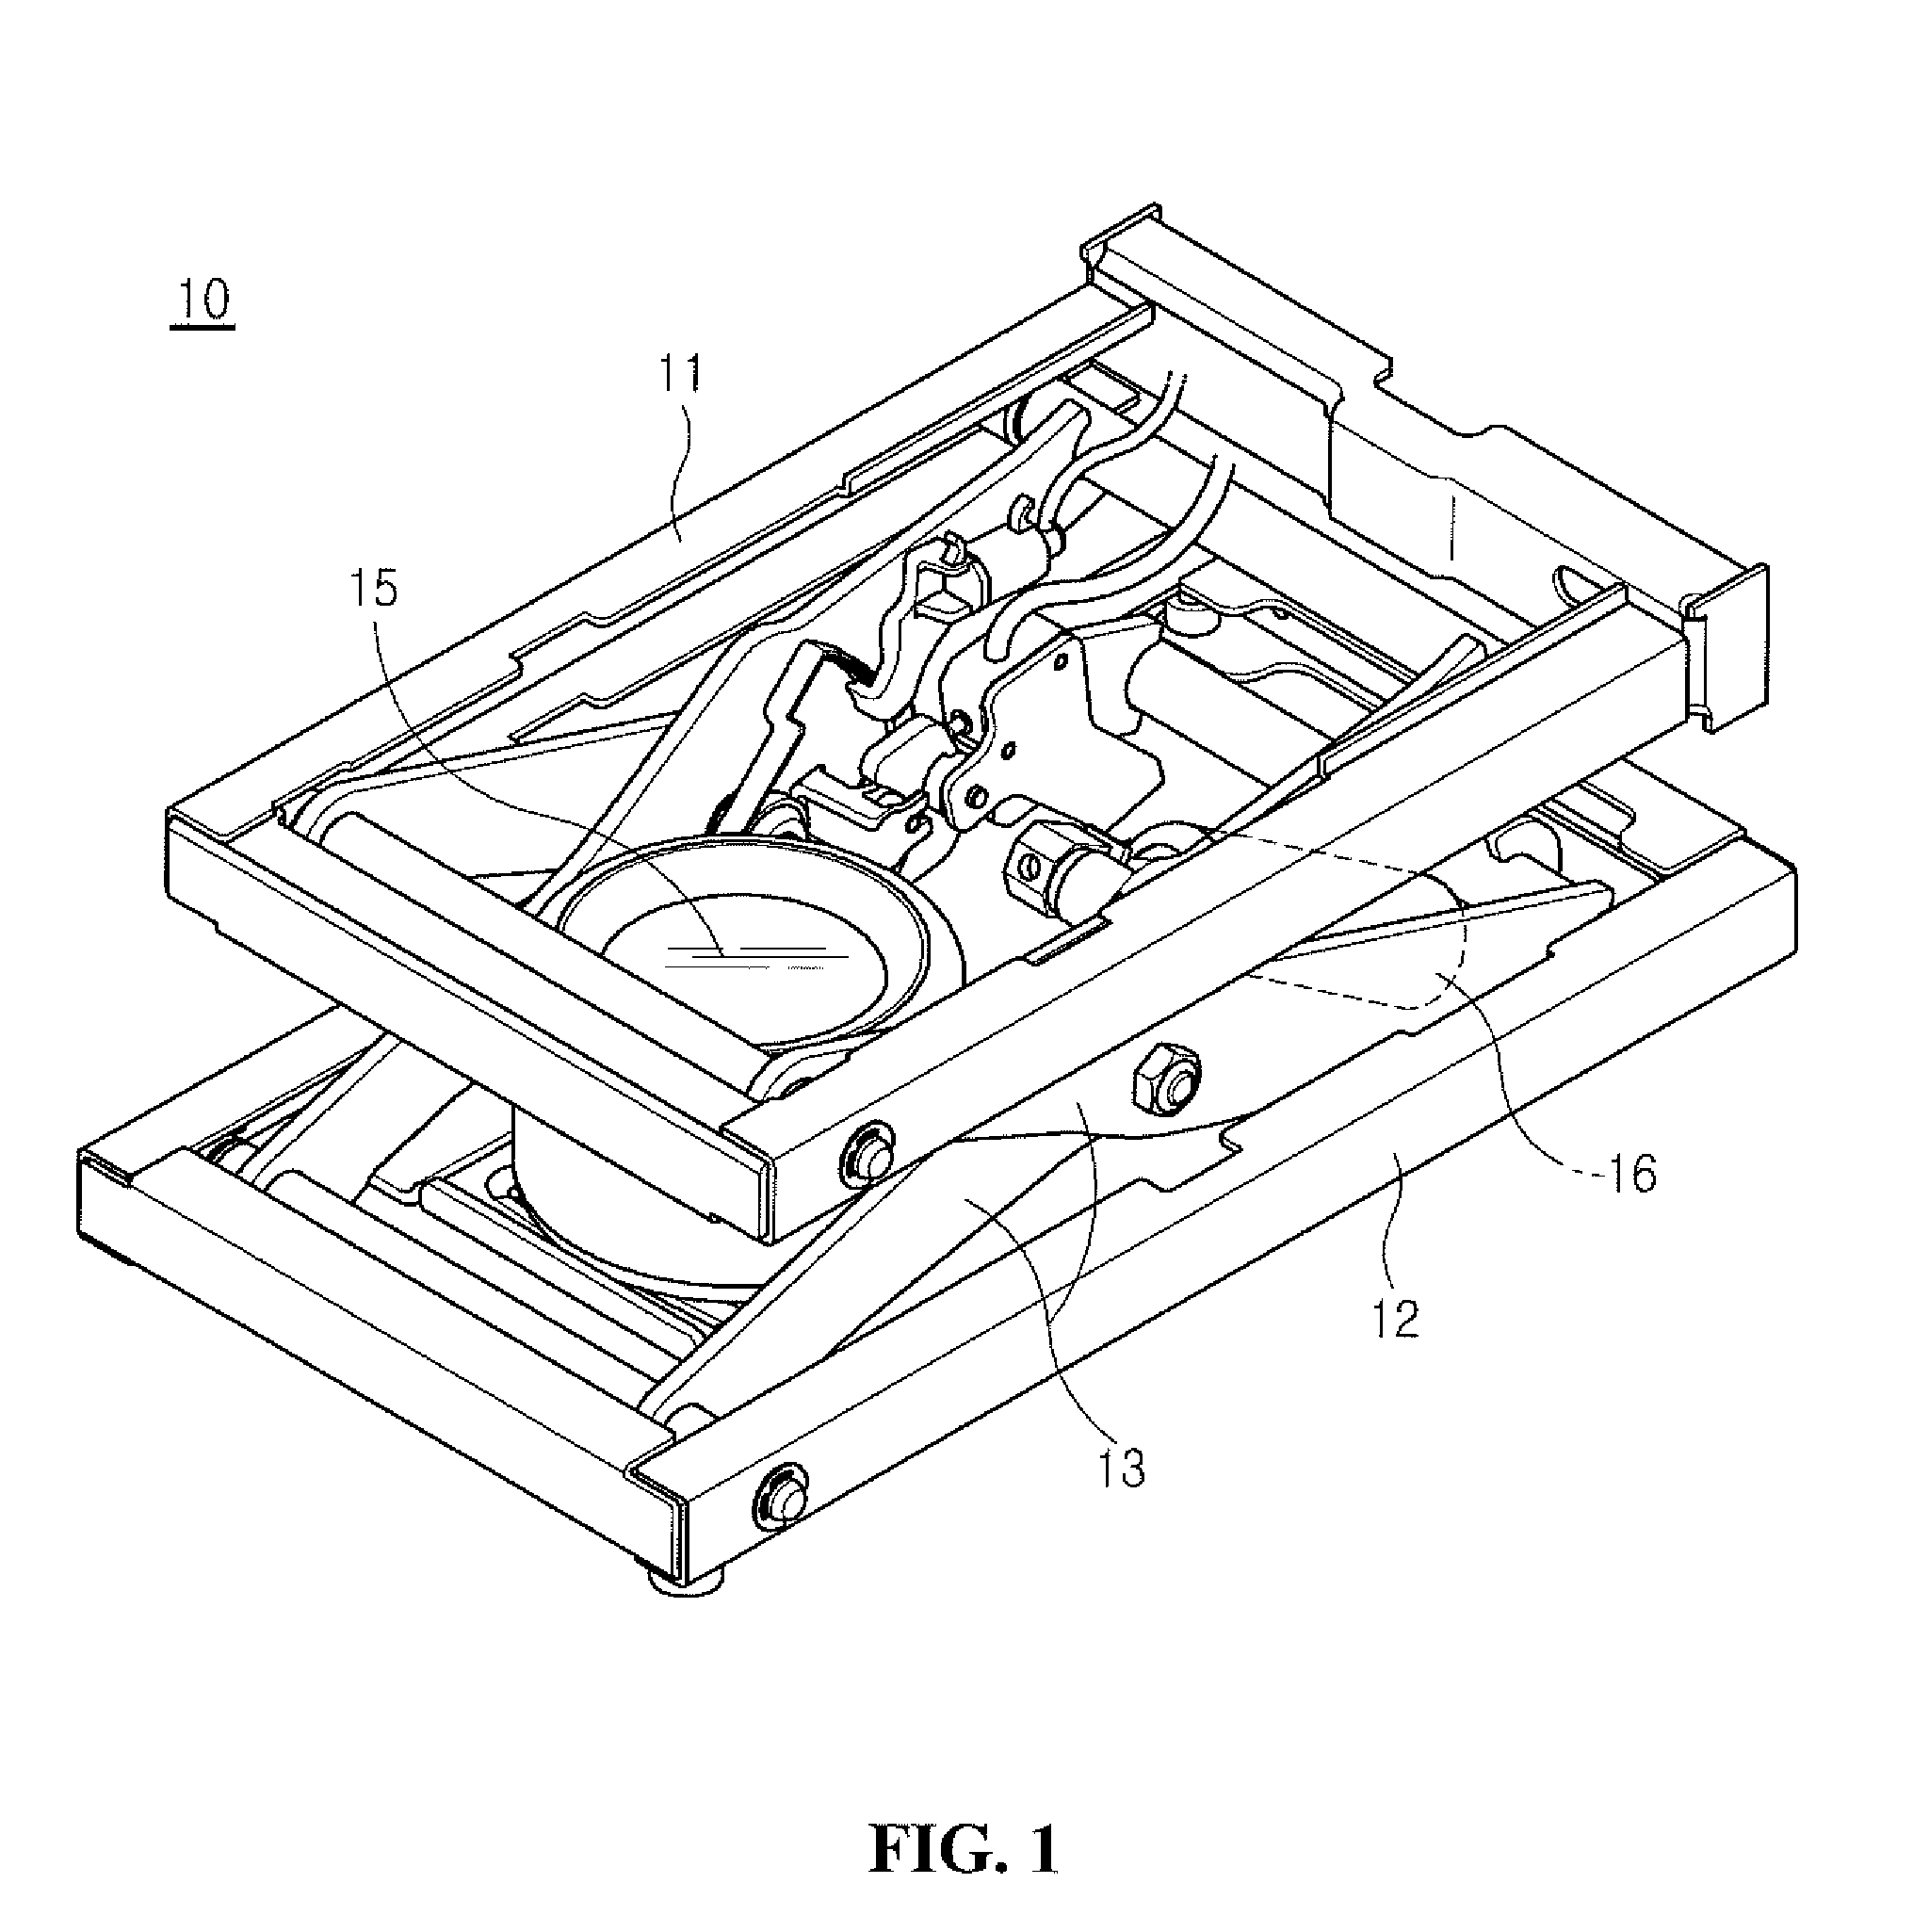 Valve-Intensive Button for Adjusting Height of Cushion Seat for Vehicle